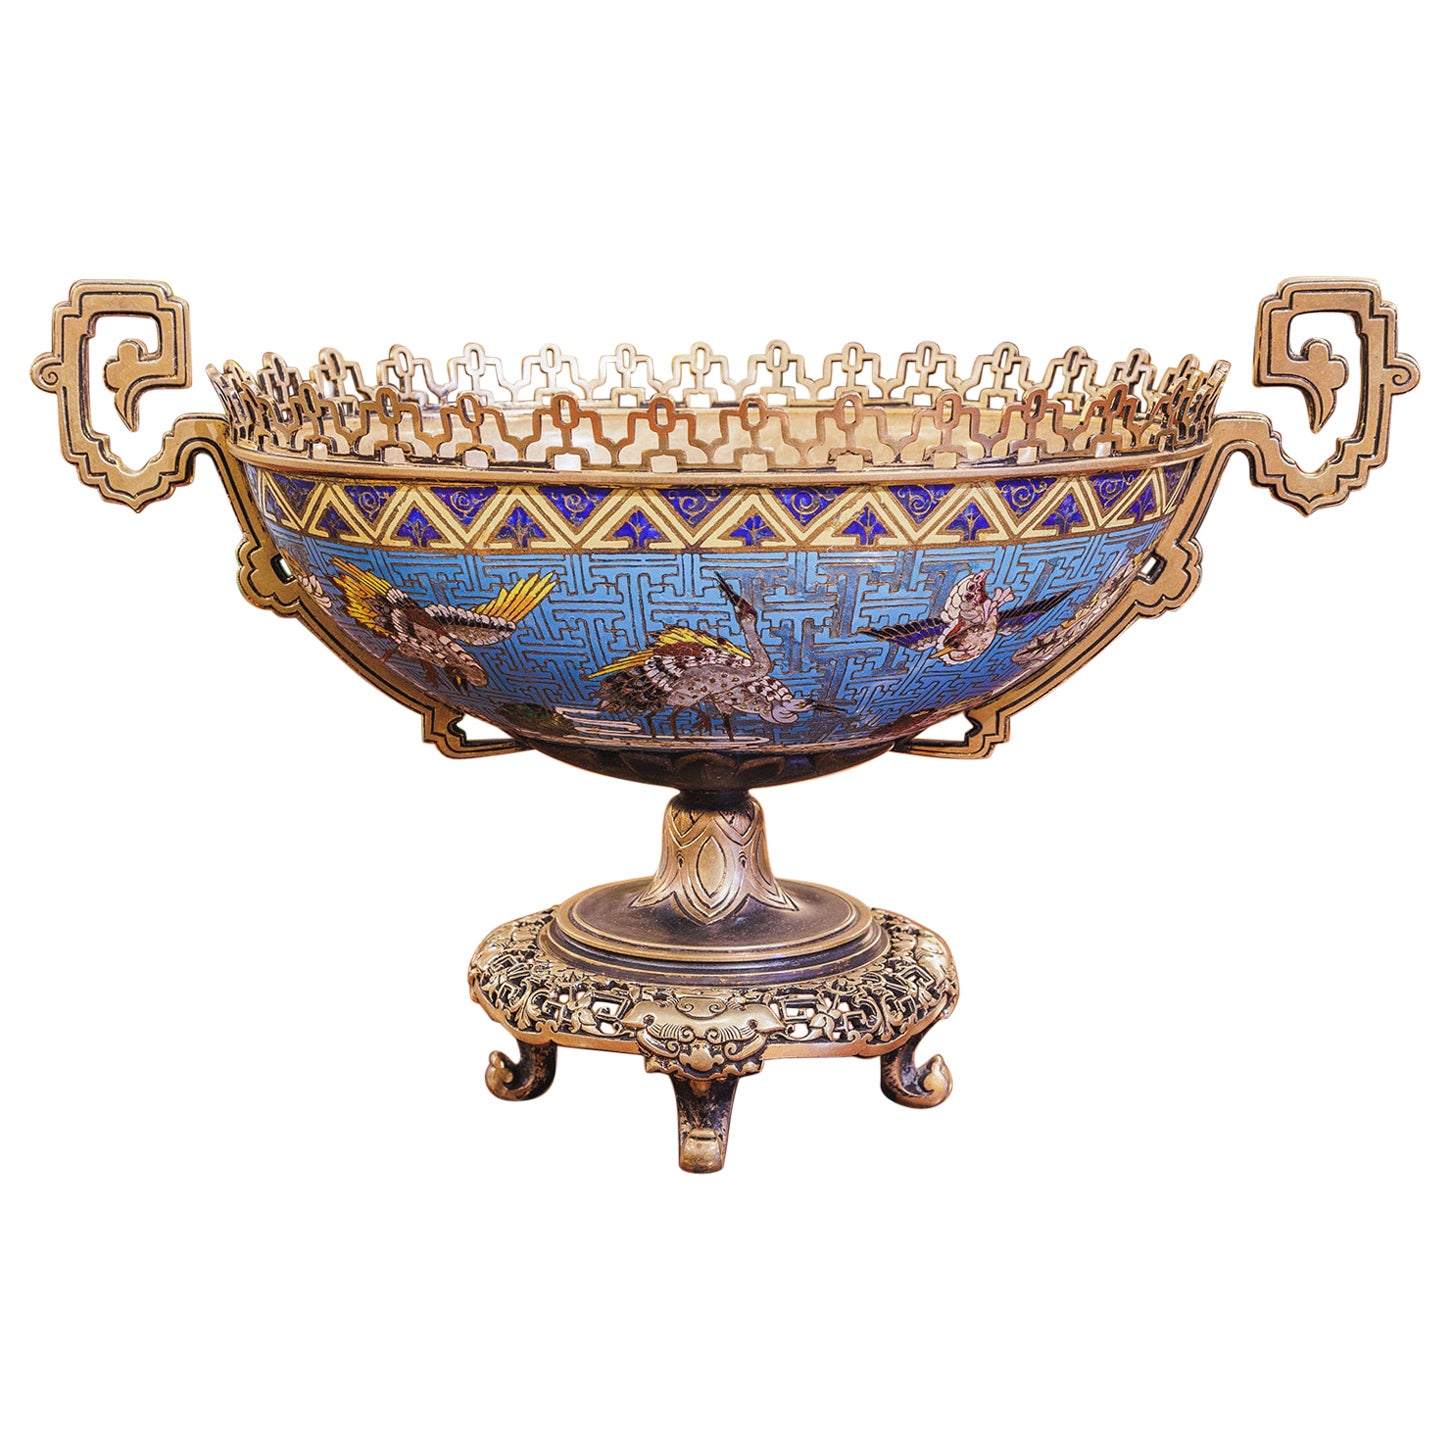 A very fine 19th century French Cloissone 11and gilt bronze centerpiece